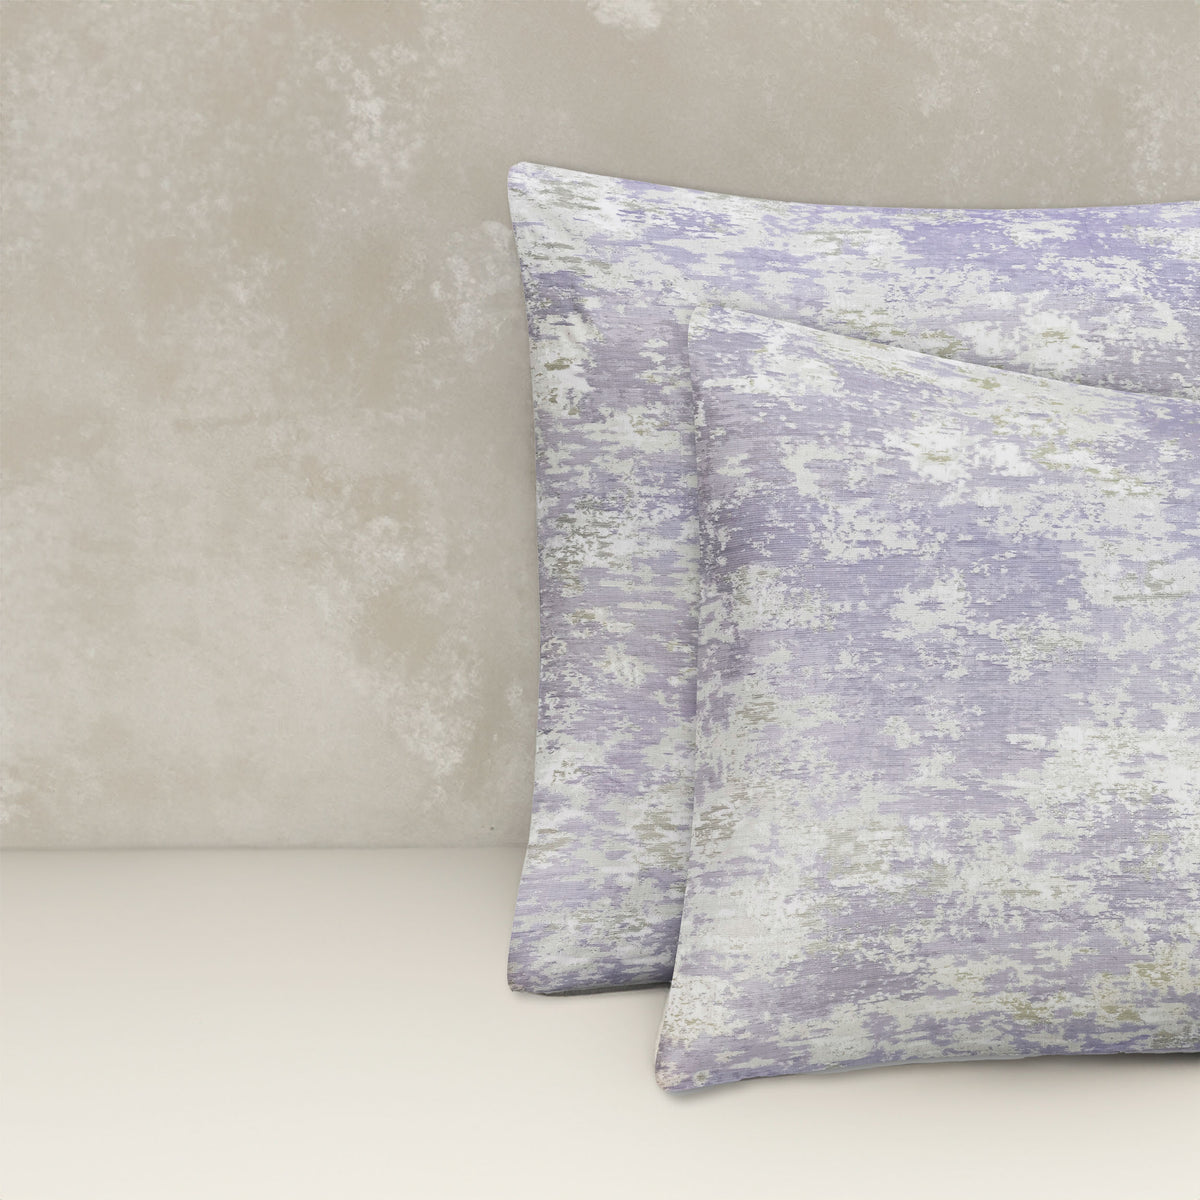 An image of two pillows stacked one in front of the other. The pillow cases are made of LETTO Le Marais Jacquard fabric in color Amethyst. data-image-id=